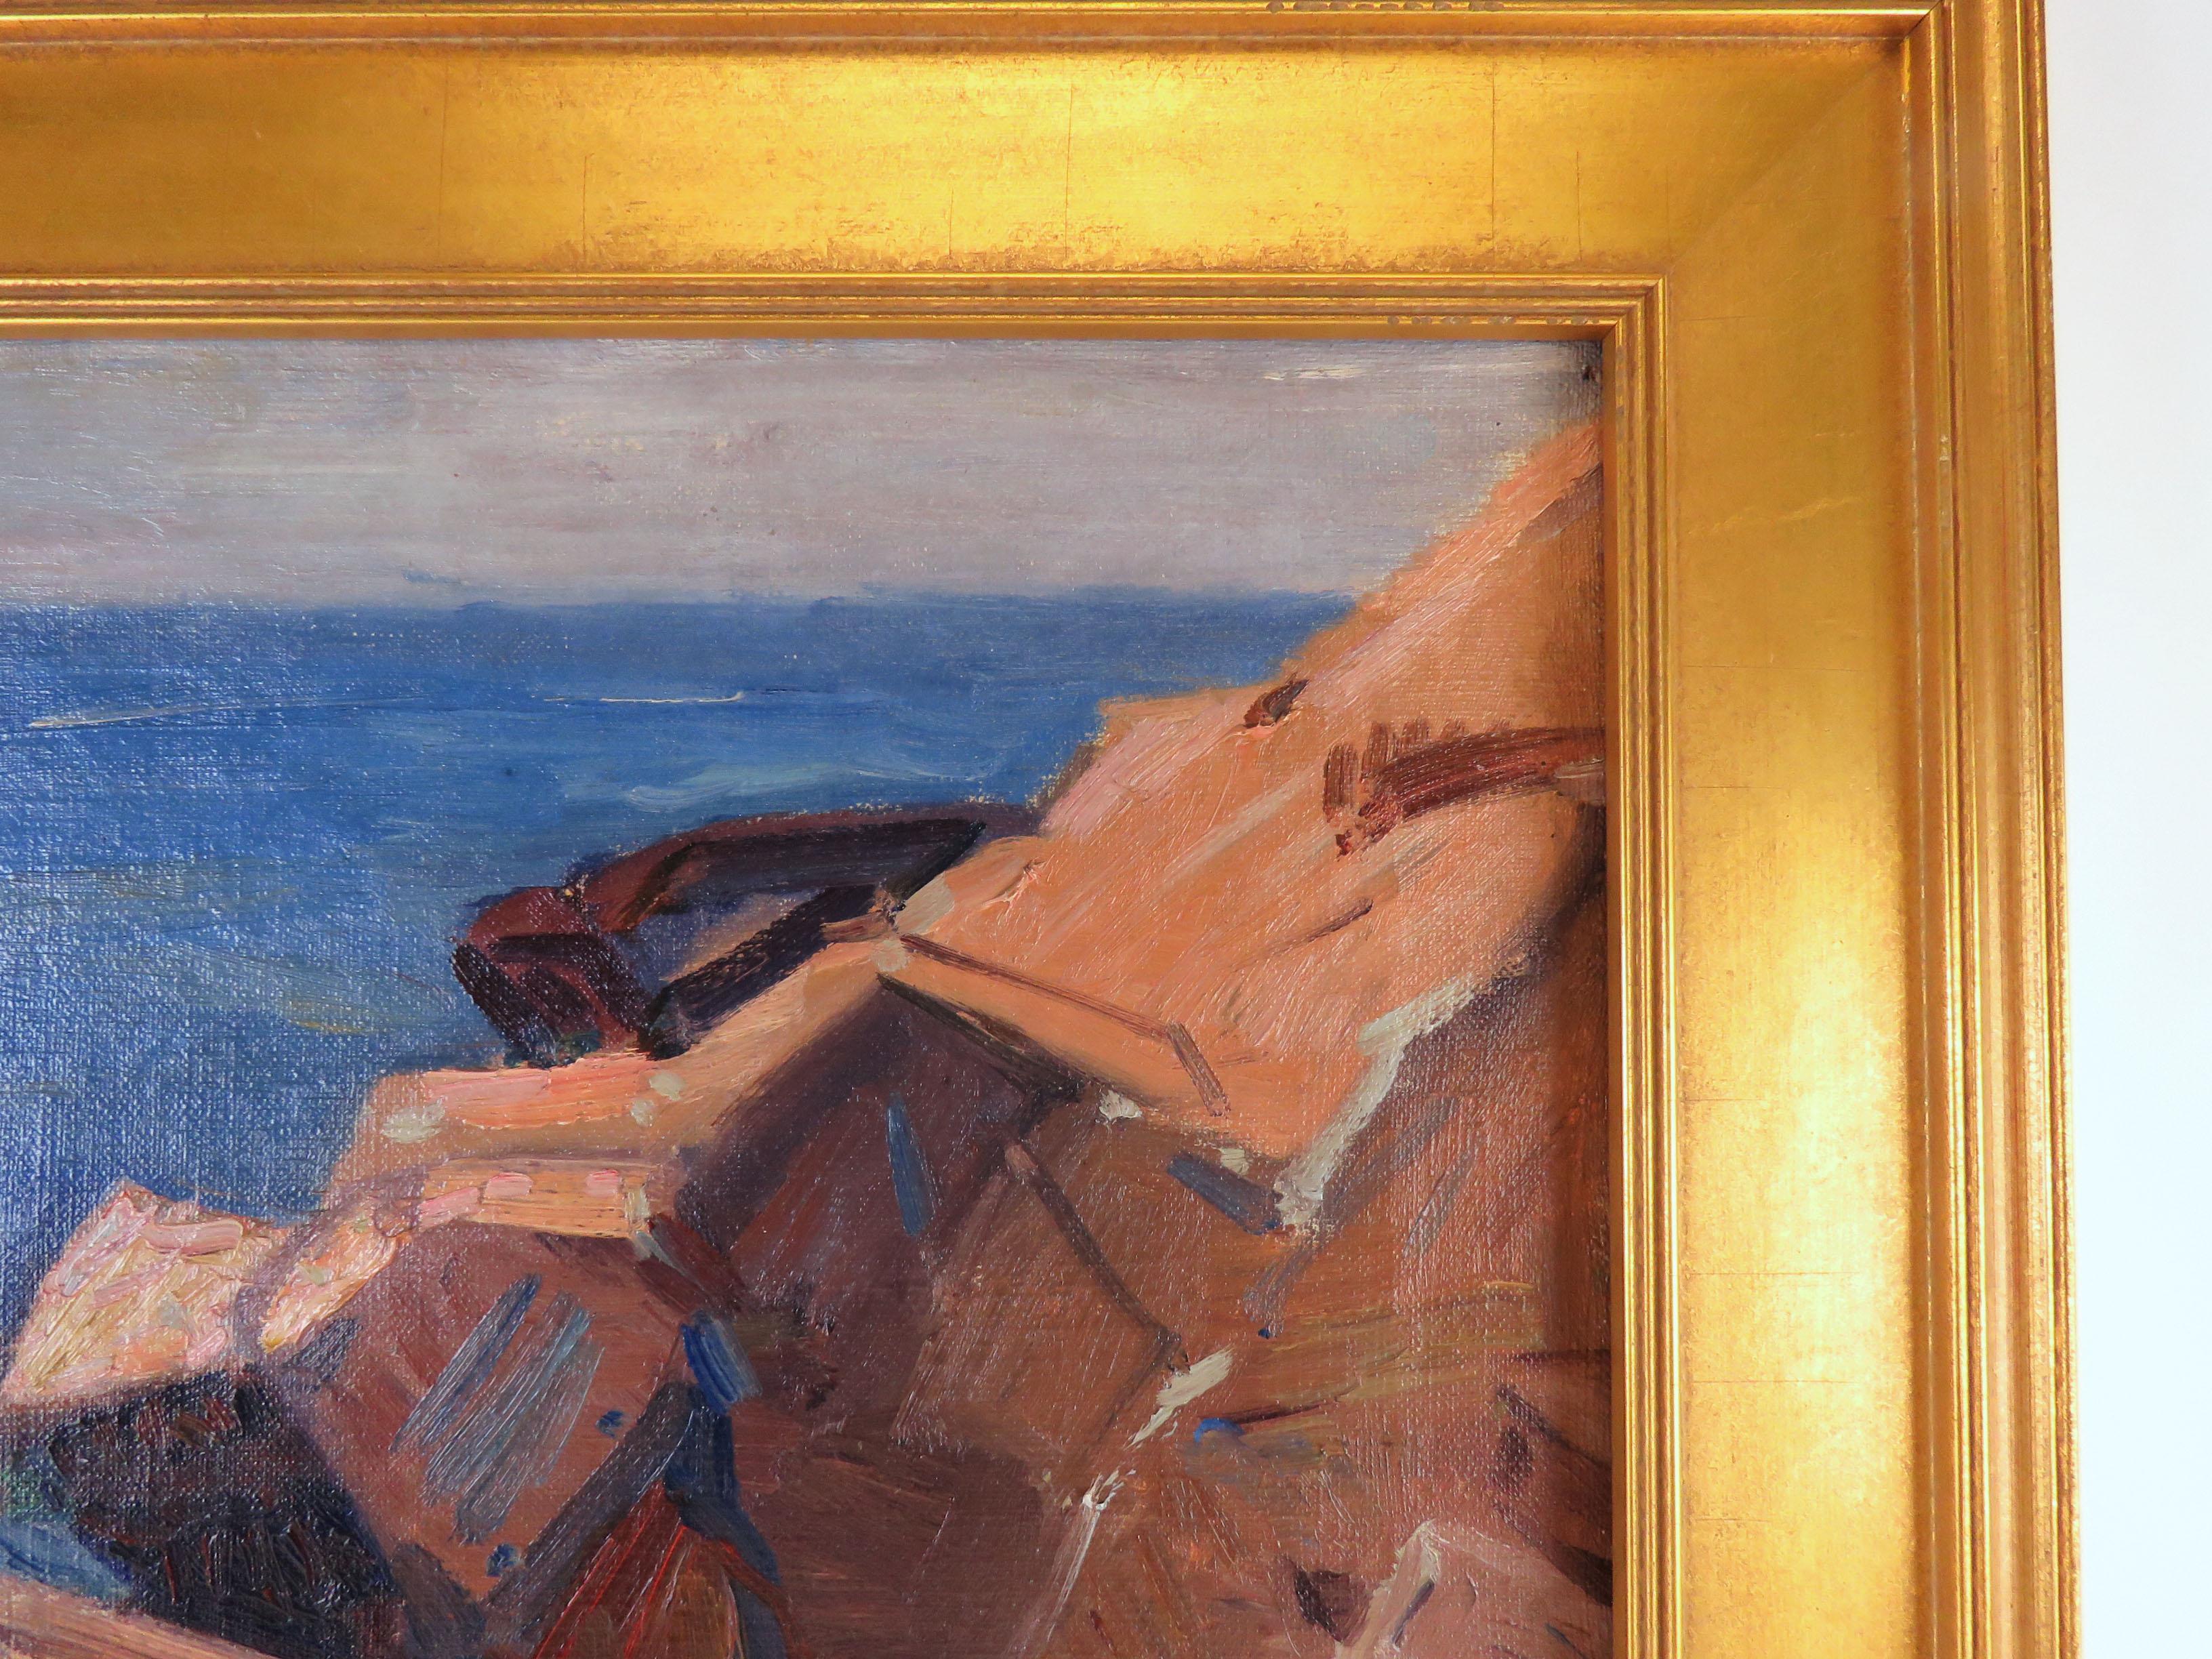 A modernist seascape oil on canvas by listed artist Karl Schmidt (1890-1962). Although a native of Massachusetts, Schmidt was known primarily as a California impressionist. He exhibited widely there and his early work had a strong Arts & Crafts